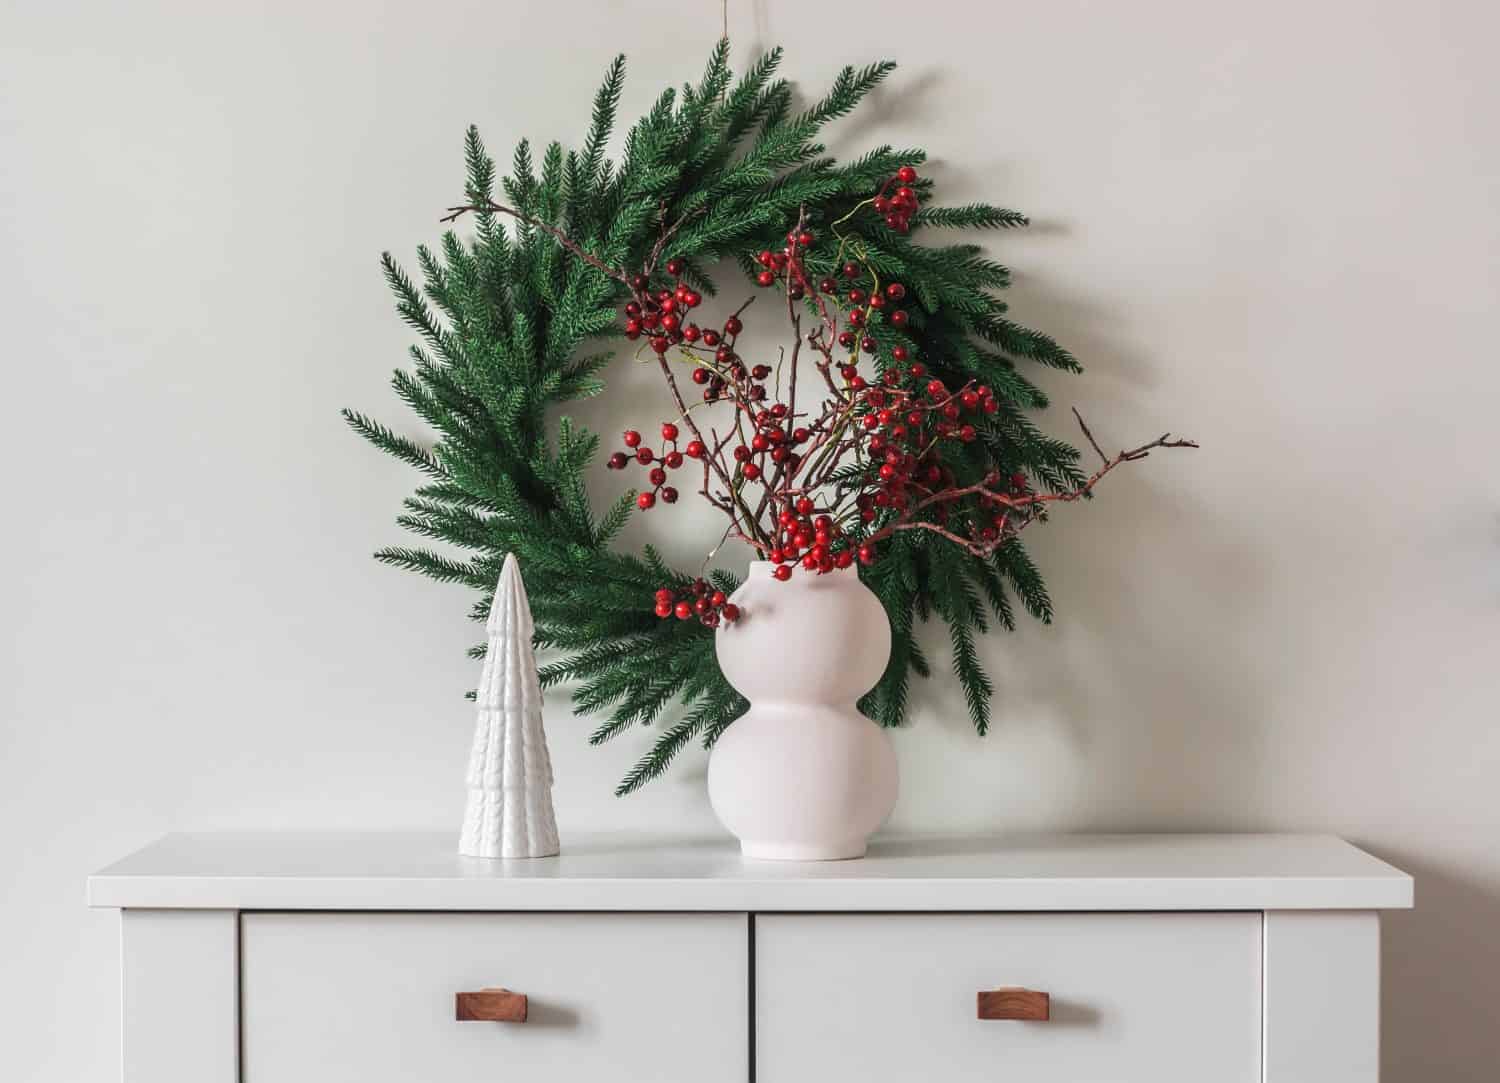 Scandinavian-style Christmas decor in the living room - a spruce wreath on the wall, a vase with cranberry branches on a white chest of drawers